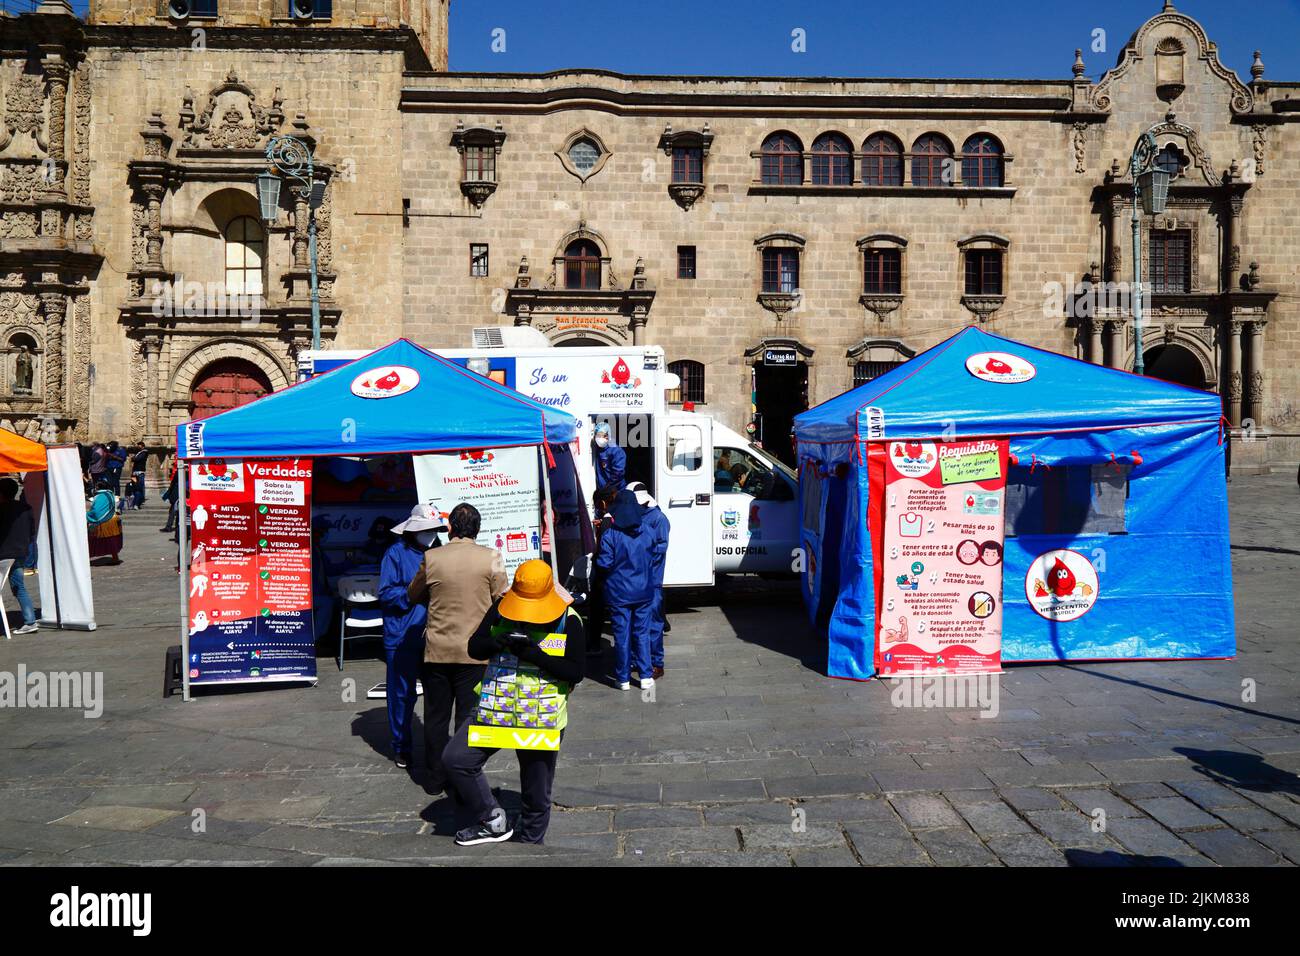 Plaza San Francisco, La Paz, Bolivia. 2nd August 2022. A doctor talks to a member of the public next to mobile collection centre where people can give blood, a service organised by the La Paz city health authorities. Bolivia's blood banks rely heavily on donations from volunteers and collection centres like this are common in the city, especially during holiday periods or when there are shortages. Behind is San Francisco church, the most important and impressive colonial church in the city. Stock Photo